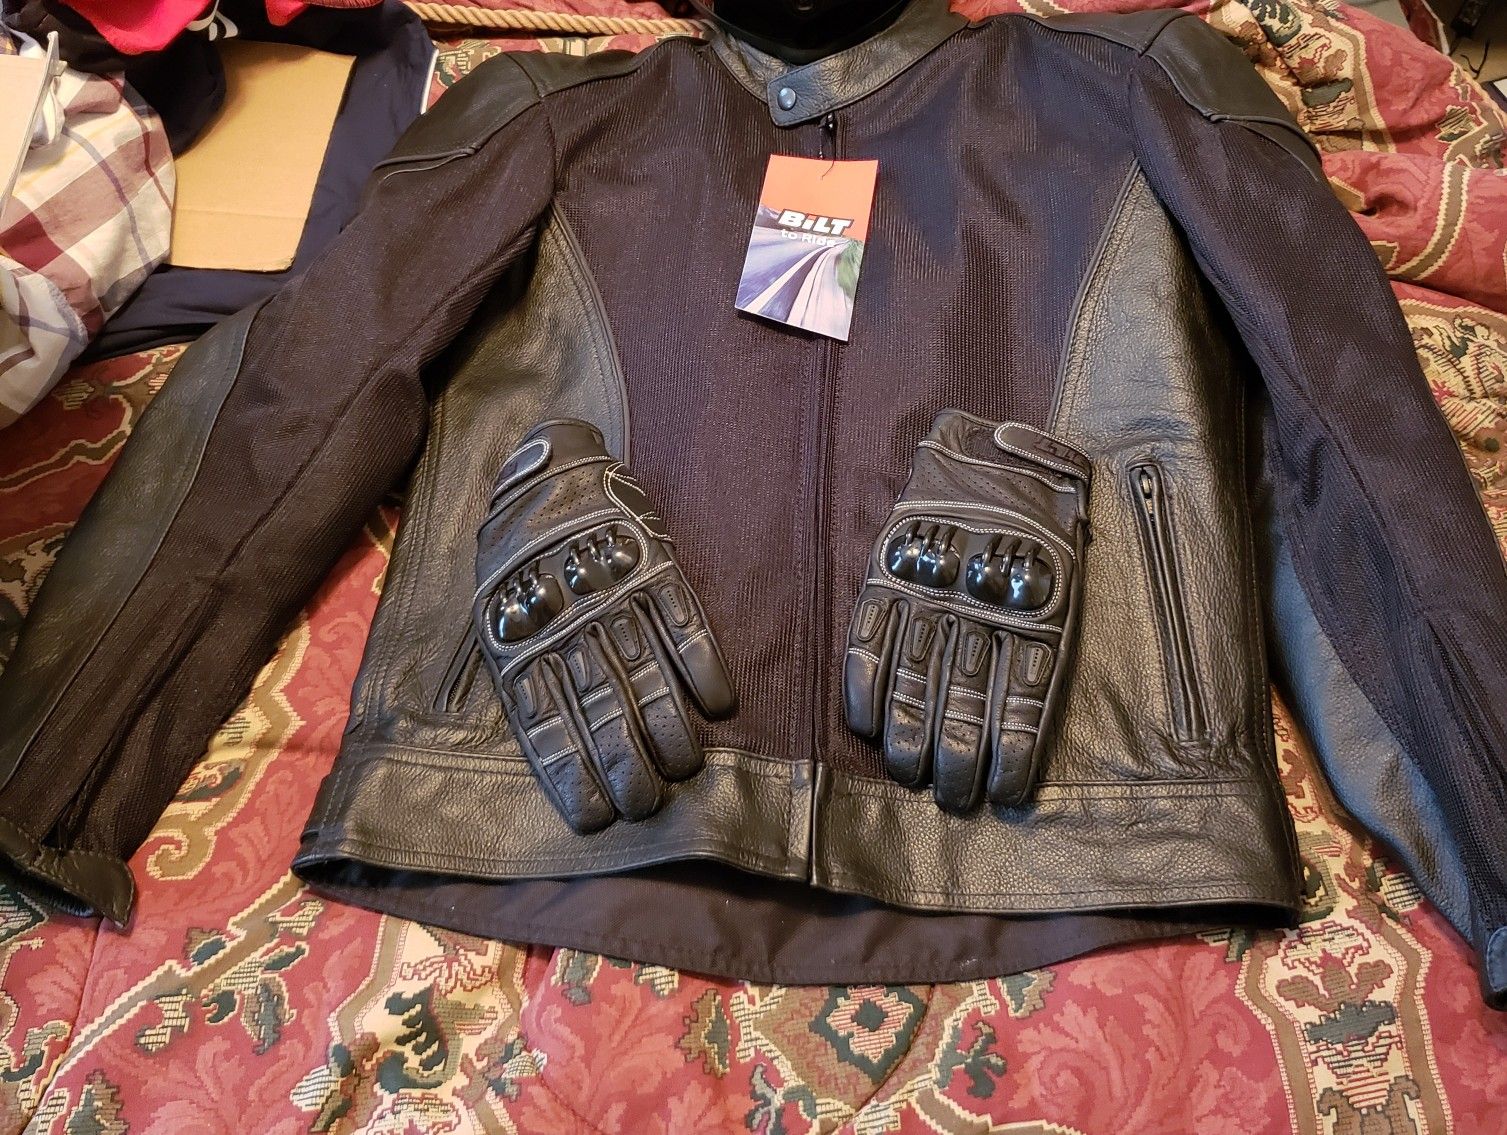 New Bilt Motorcycle Jacket with removable Liner! 100obo